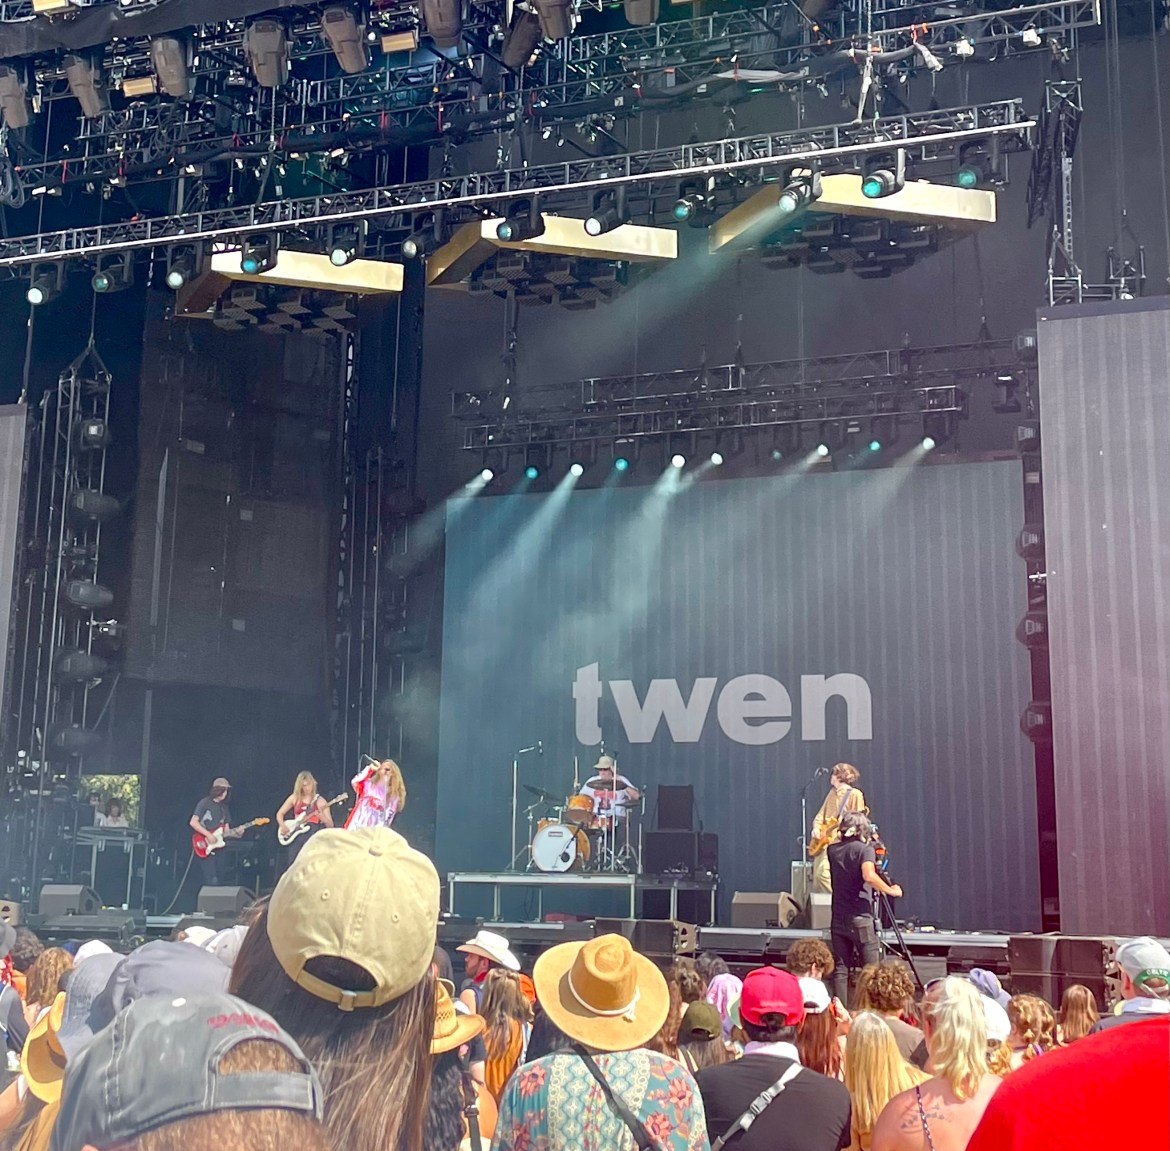 Twen at Austin City Limits 2022 ALT-TEXT: The image features the members of Twen performing onstage. The screen behind them is black with the name twen in gray. The backs of various people’s heads are seen in the forefront.